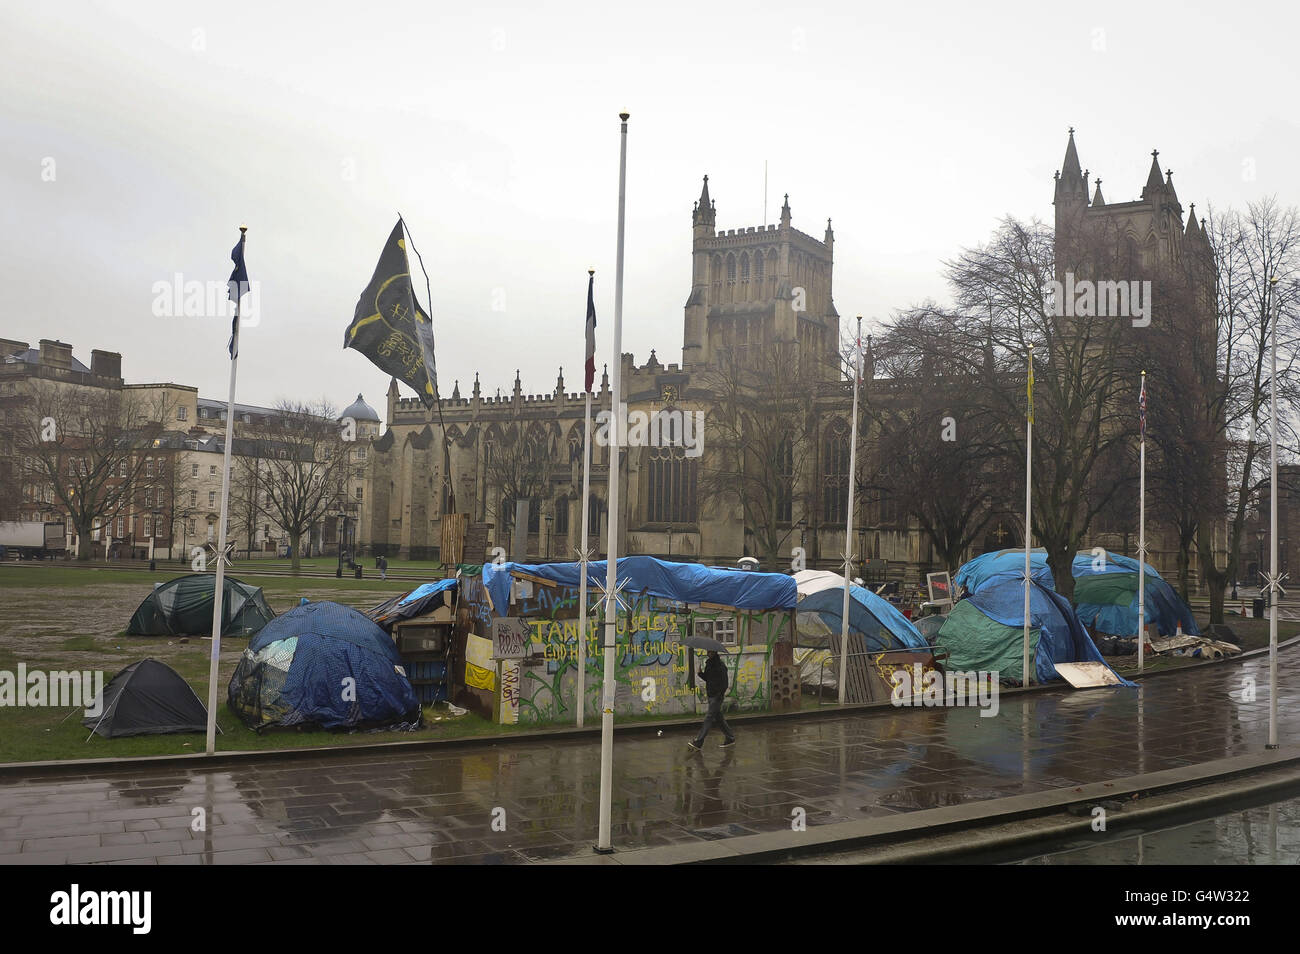 A man walks past tarpaulin structures on College Green, Bristol, where the Occupy Bristol movement have been camped since October 2011. Stock Photo